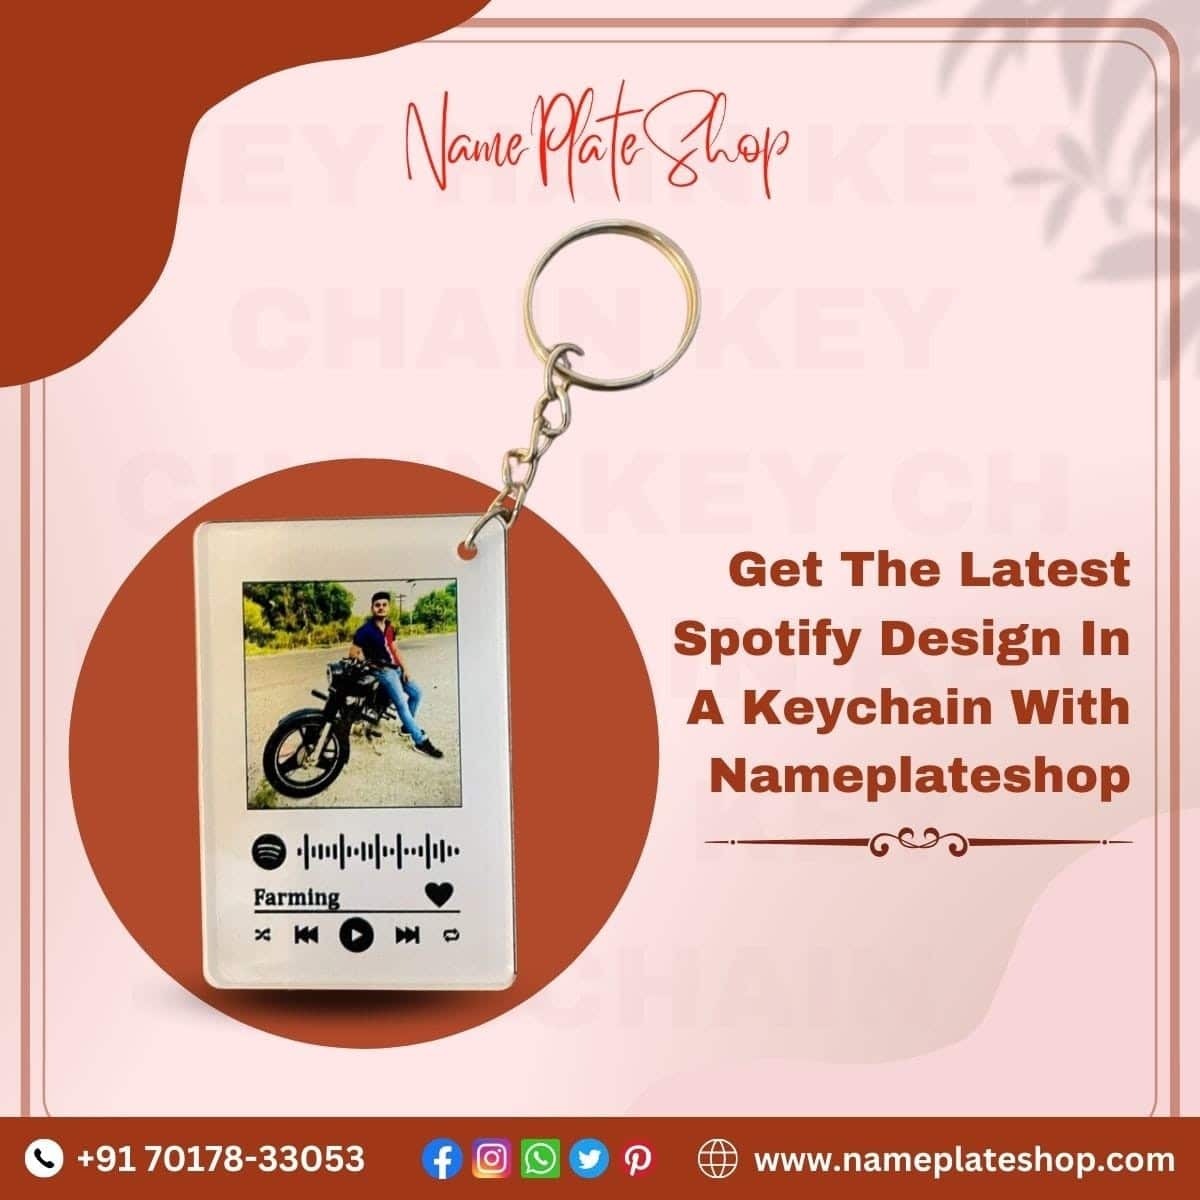 Get A Newly Designed Spotify Keychain From NamePlateShop